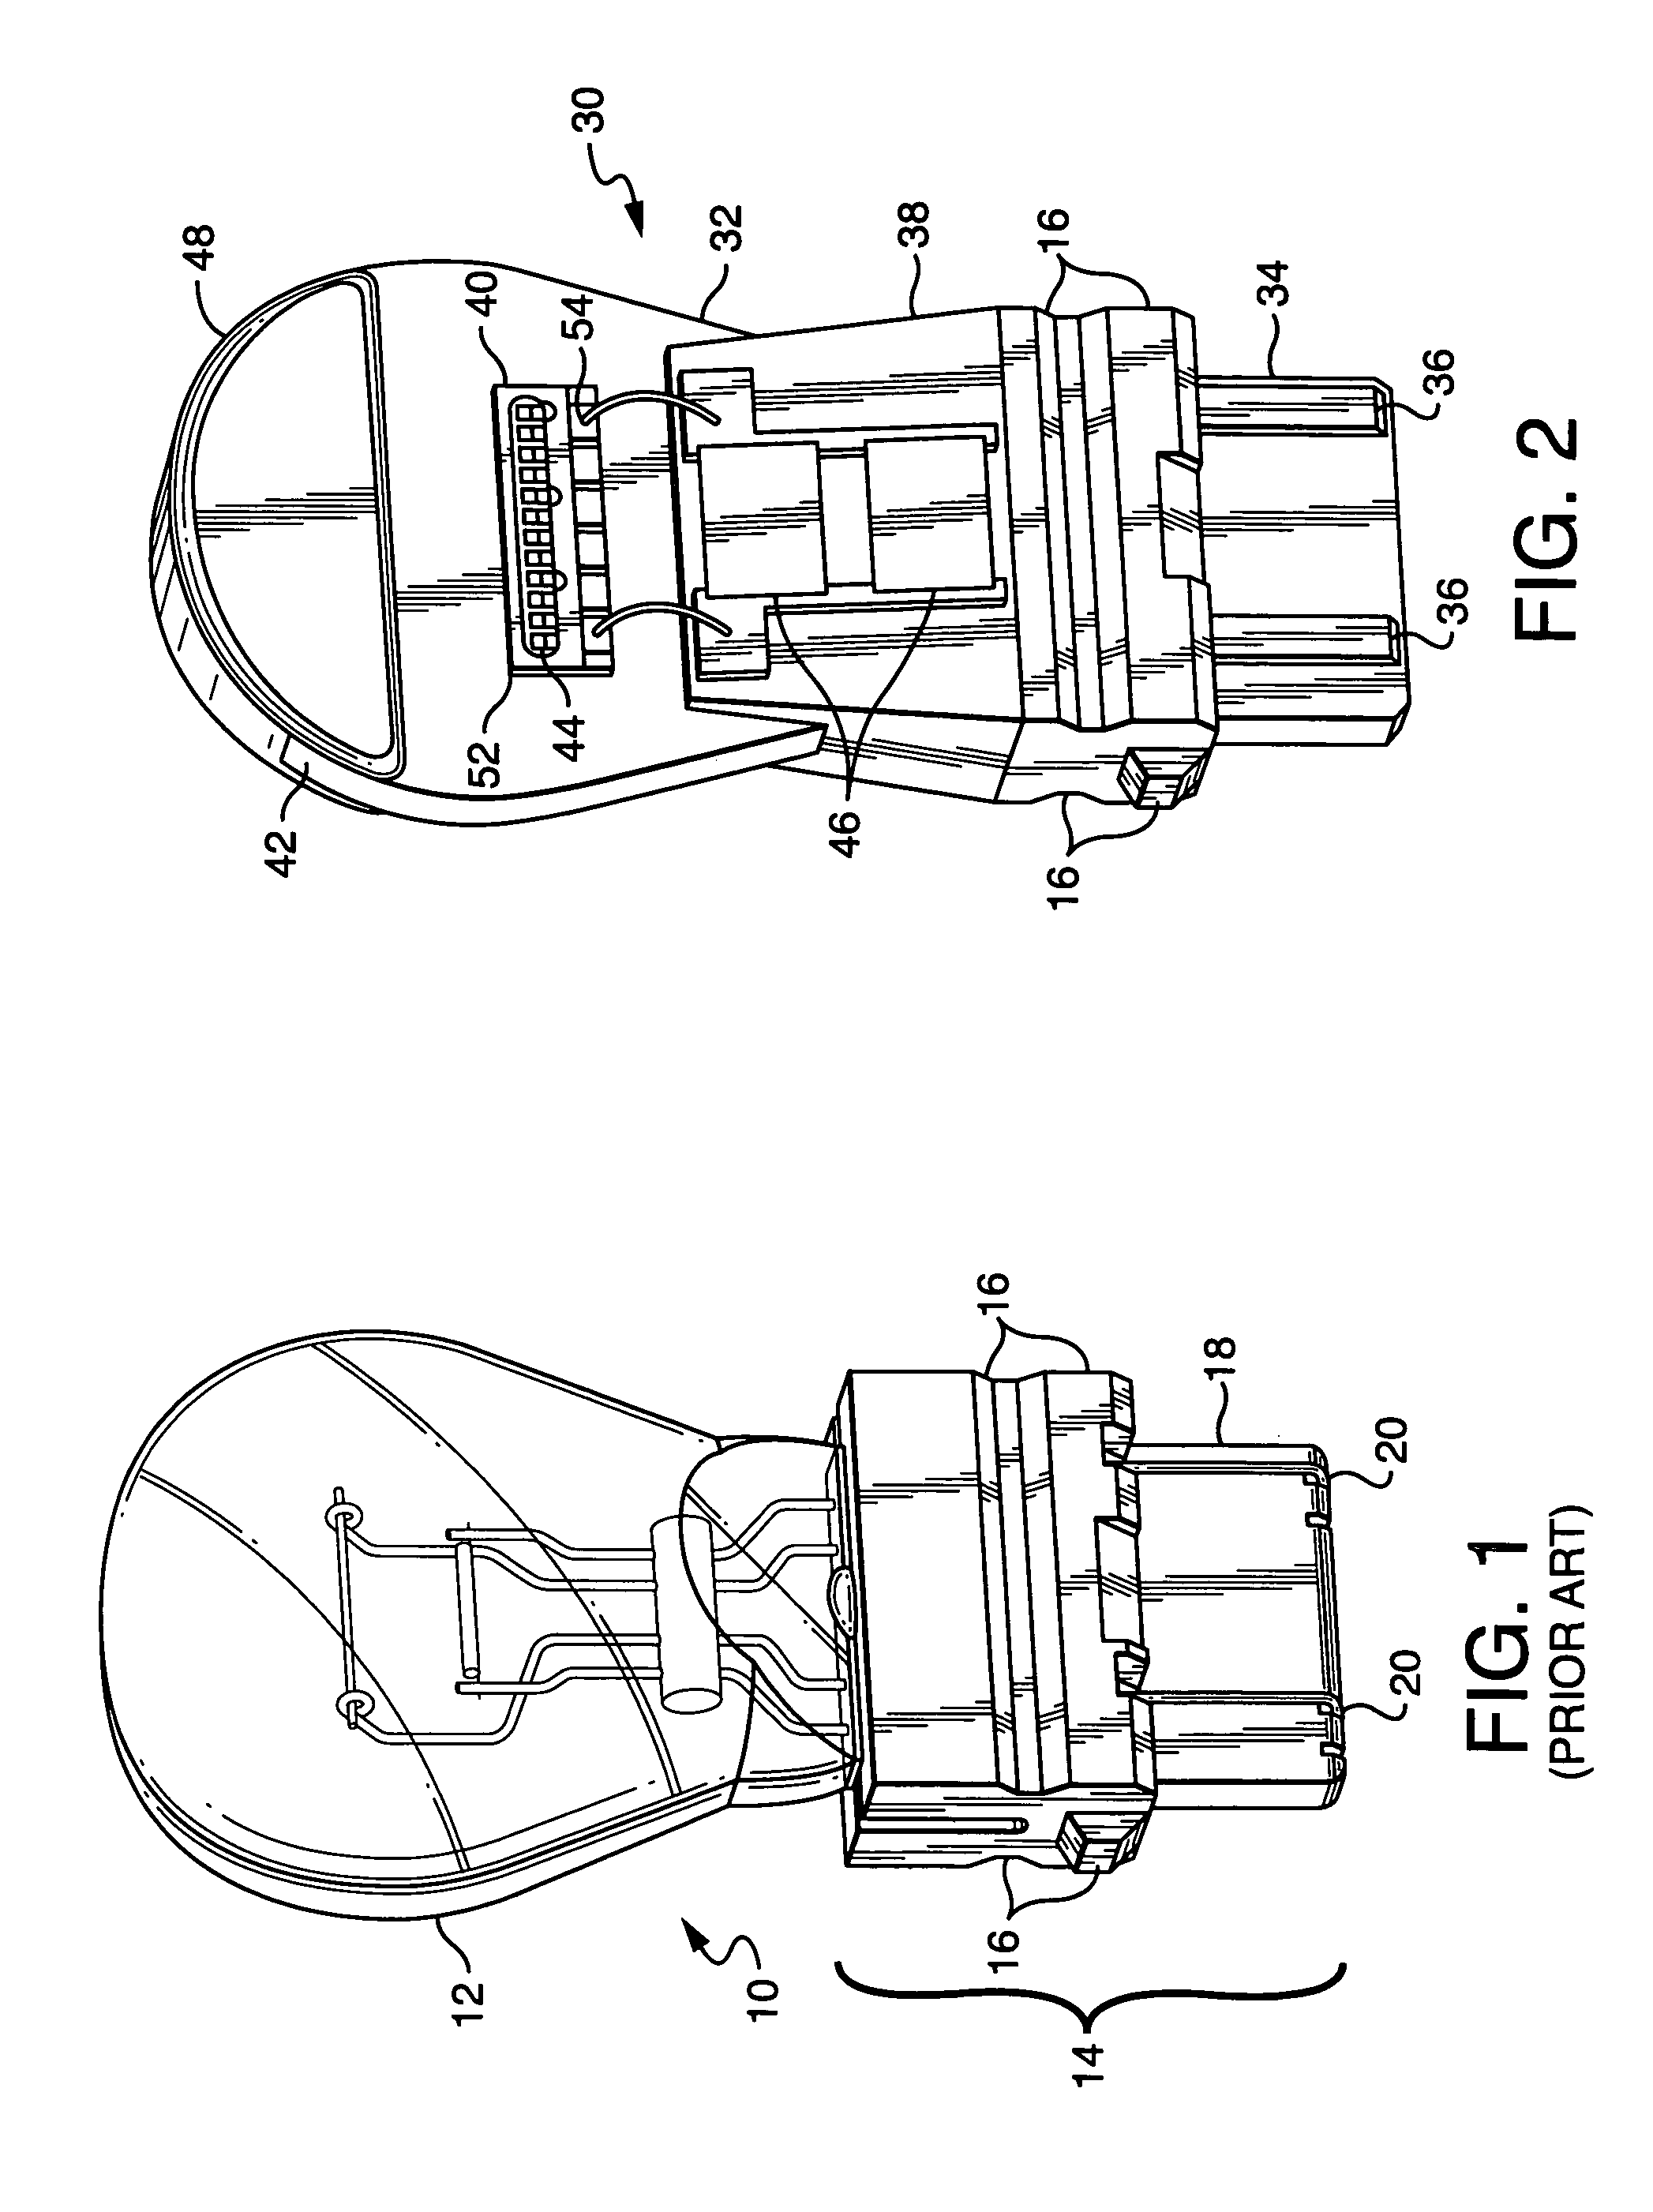 Wedge-based lamp with LED light engine and method of making the lamp